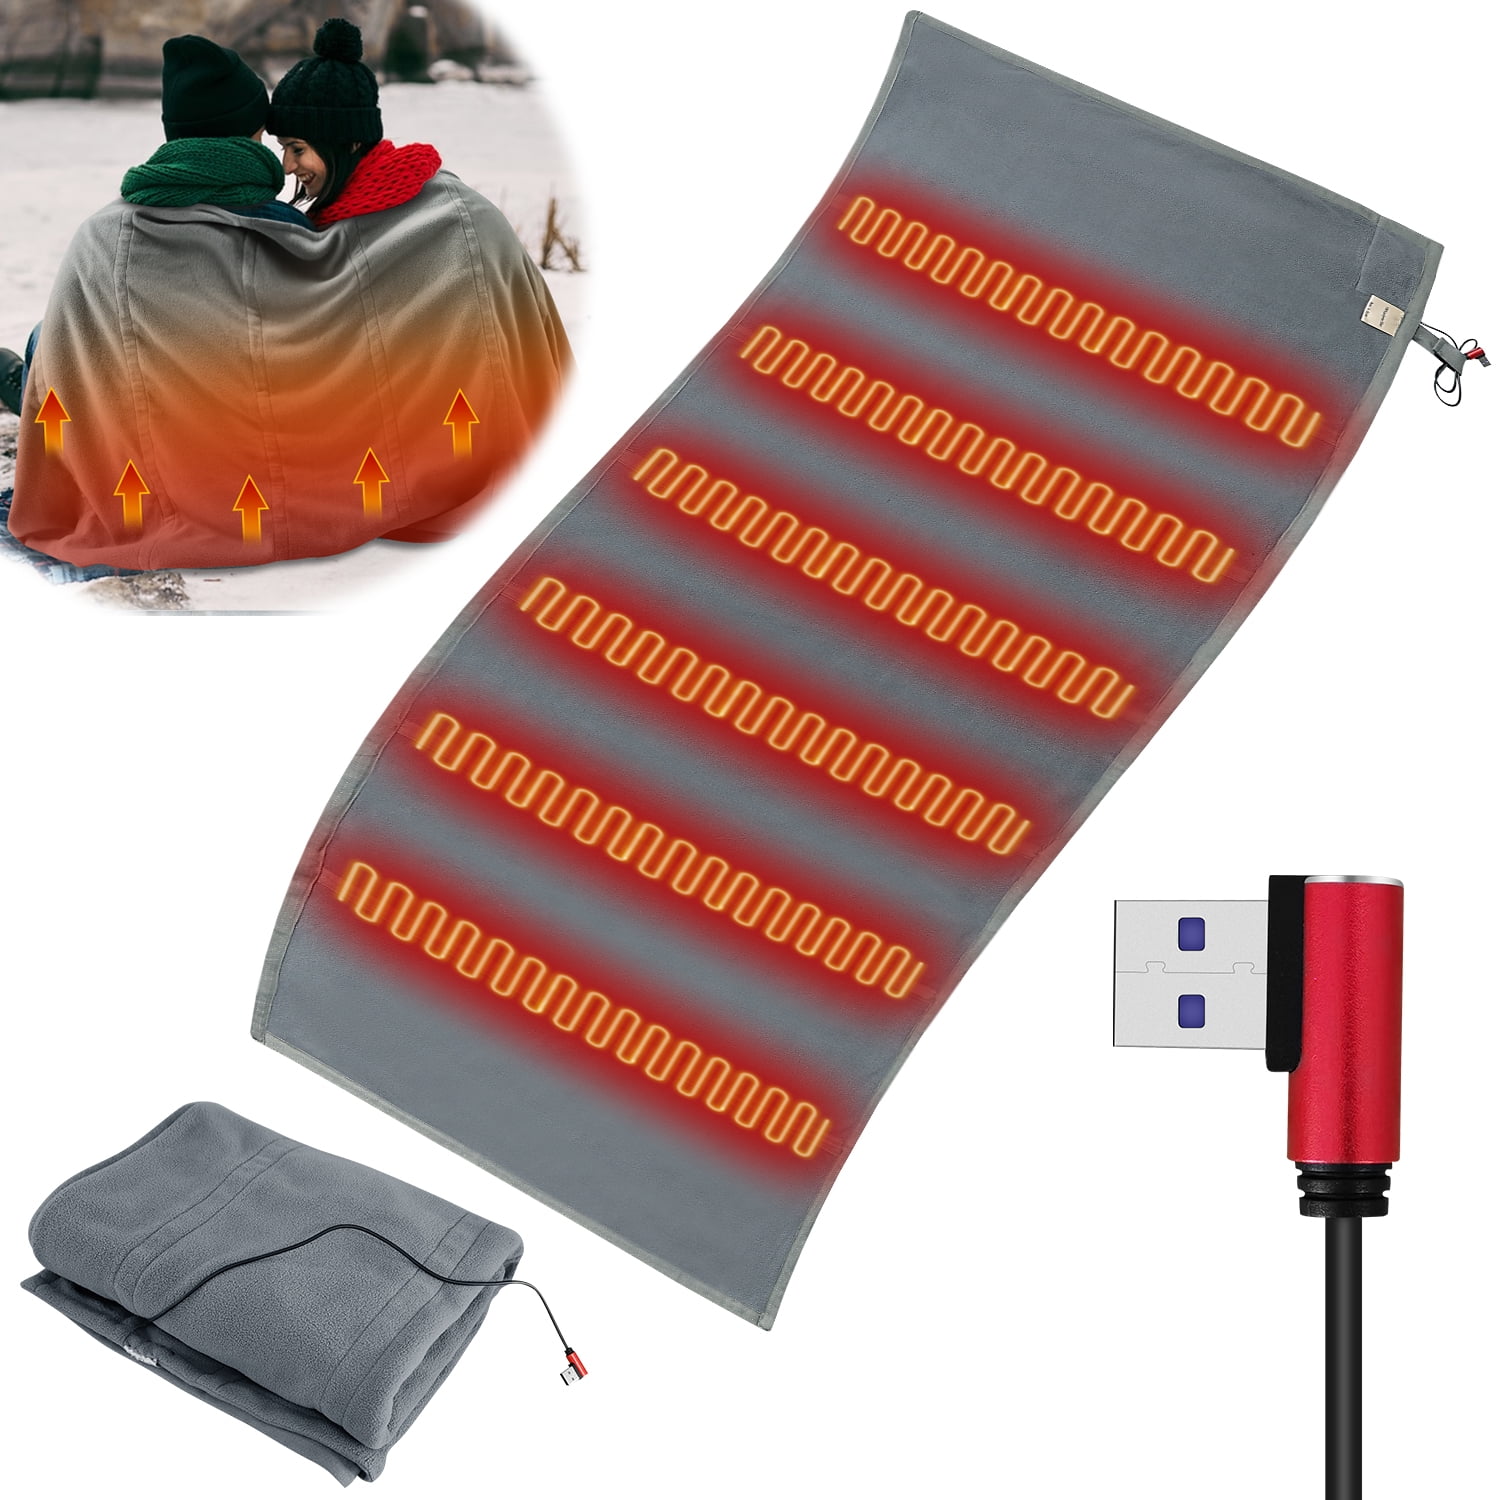 Electric Blanket Heated USB Throw Cordless Heating Pad Portable